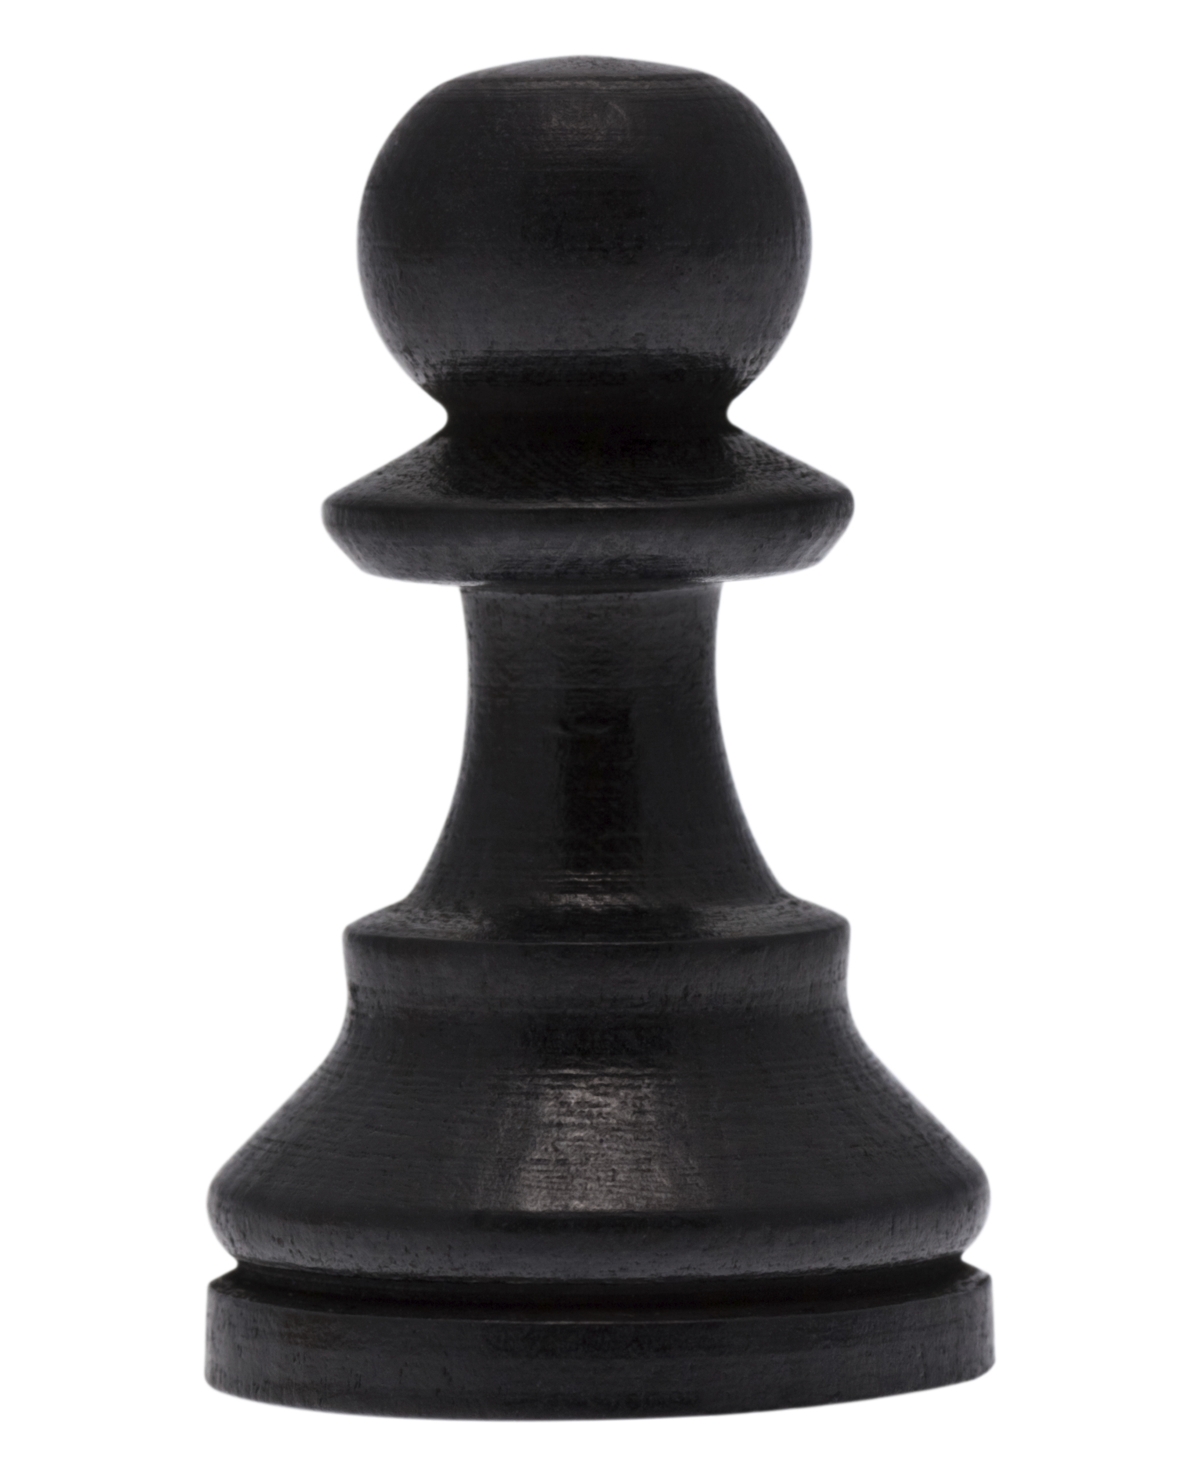 chess pieces and name